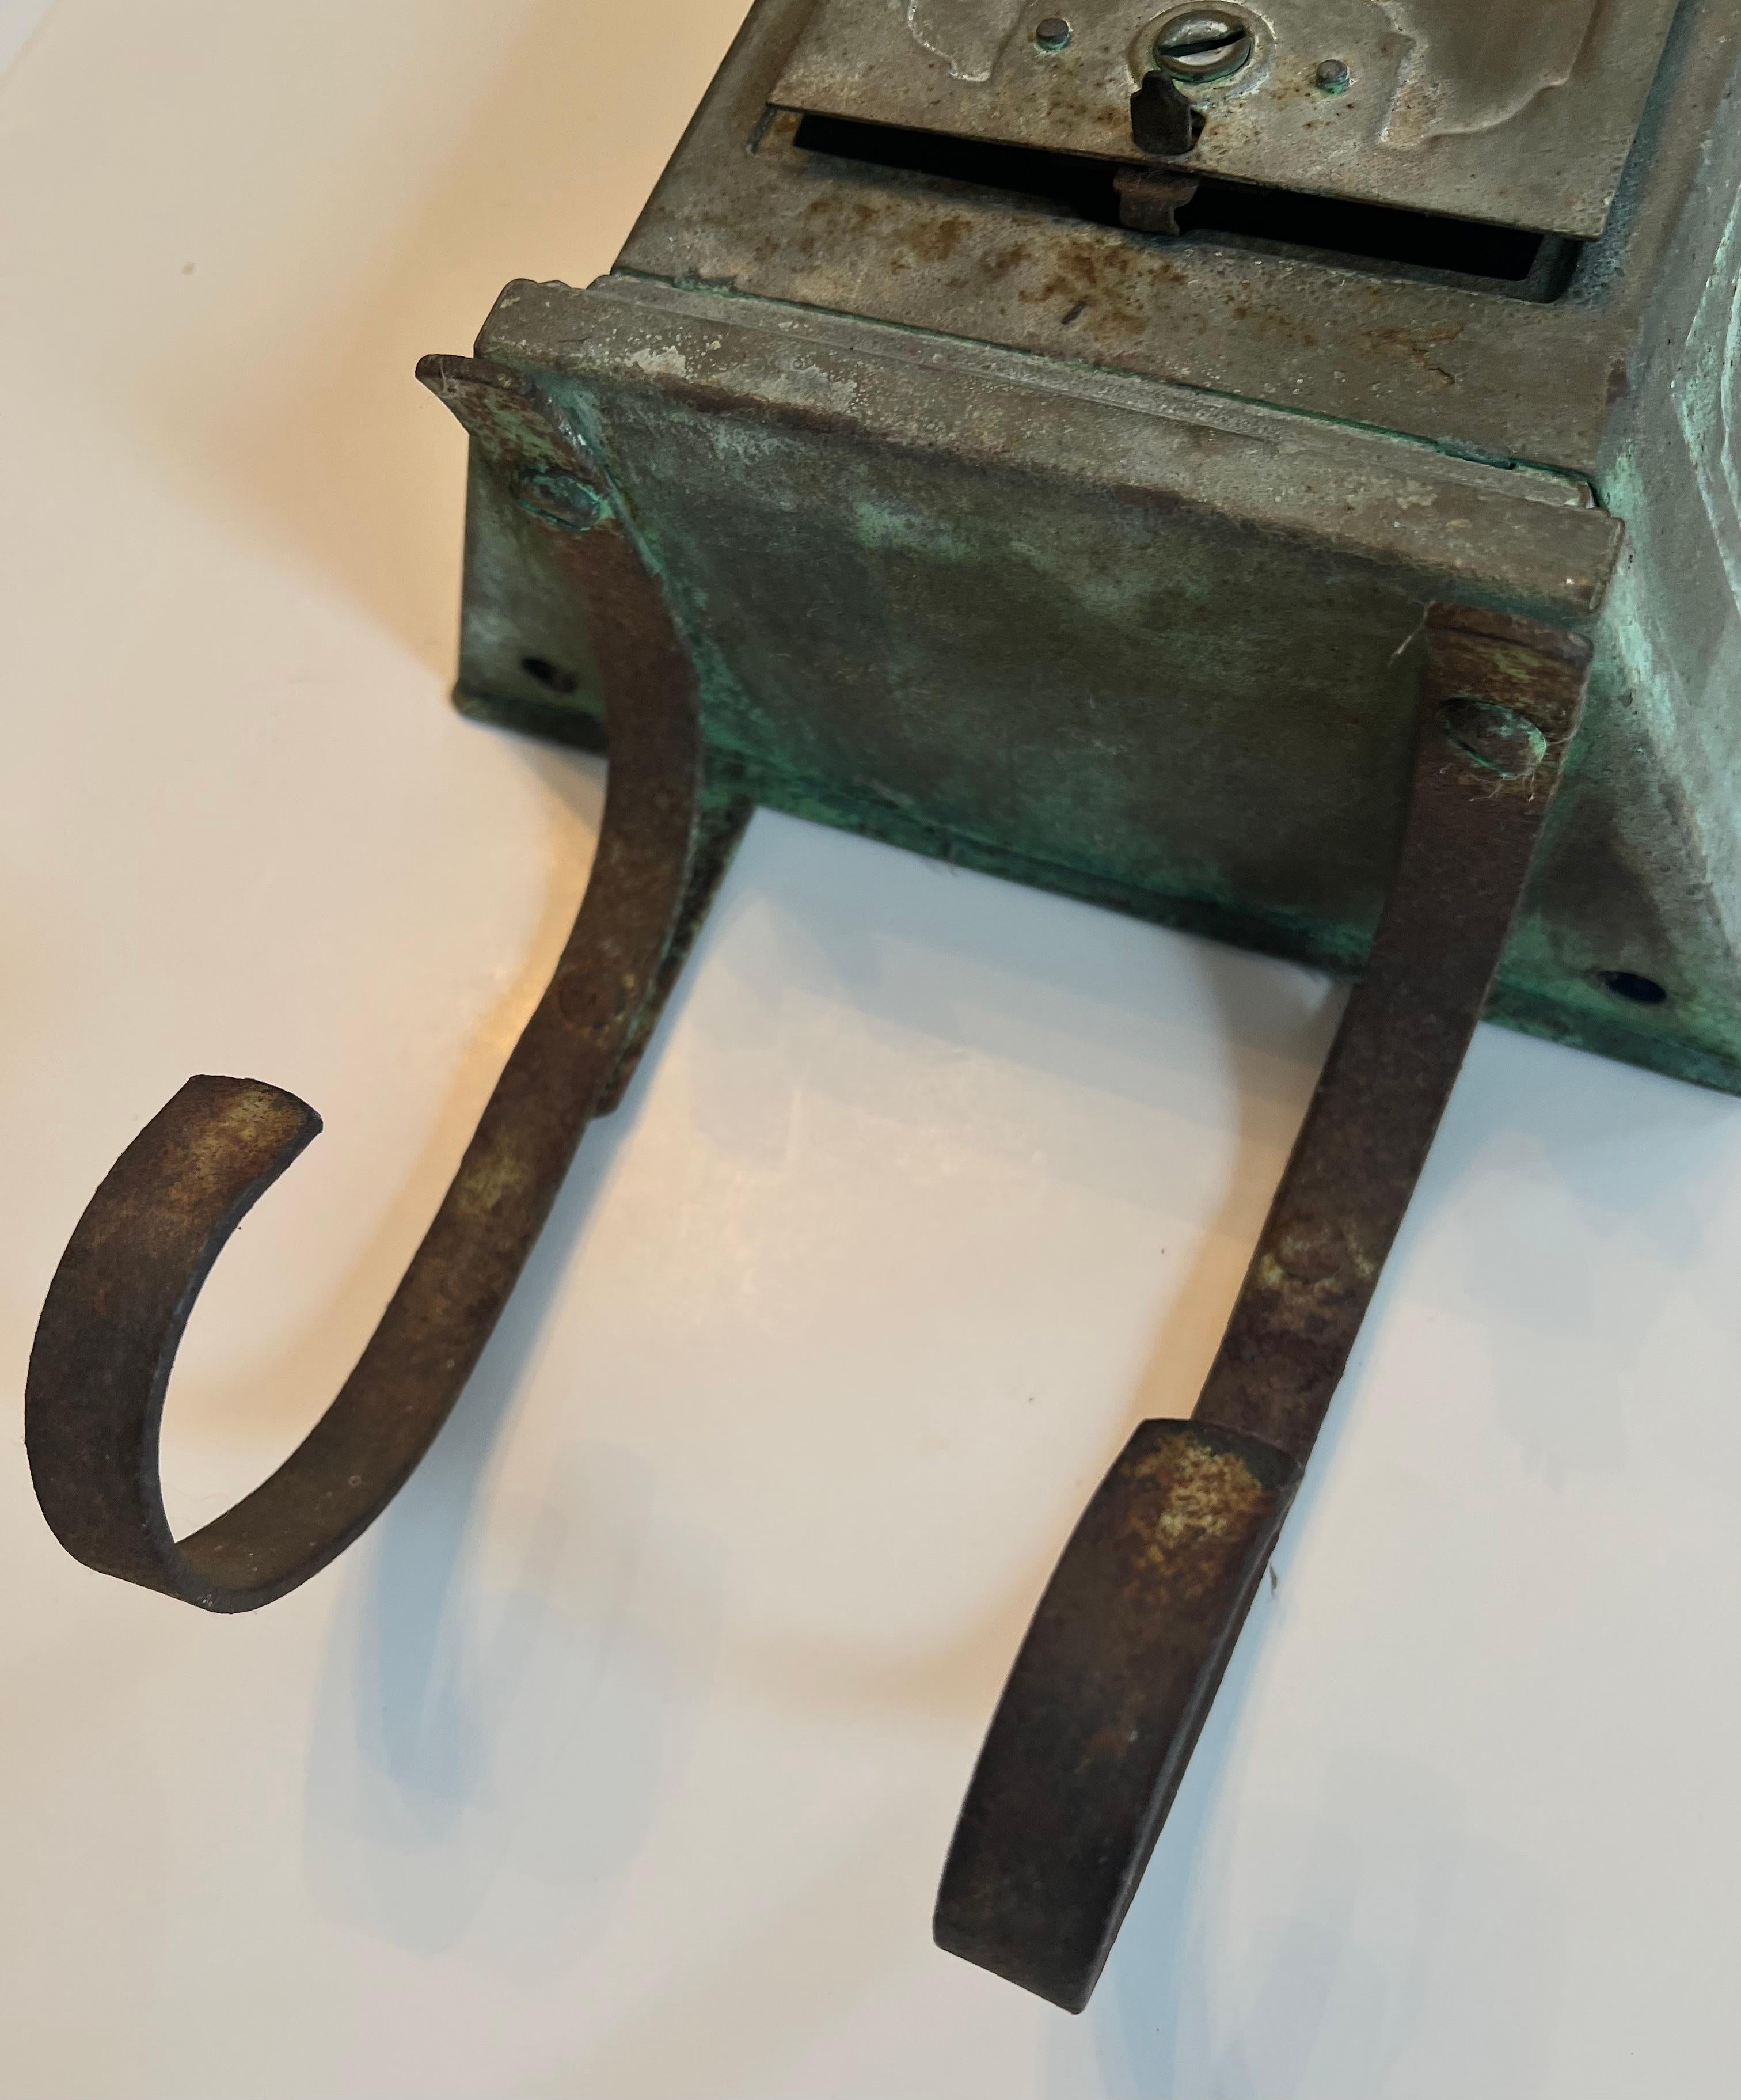 A wonderfully patinated metal mail or letter box with cradle for newspaper and larger pieces of mail.

The piece has a slit in the top to add mail, and a front door to retrieve new pieces.  The patinated finish is wonderful and rich.    A compliment